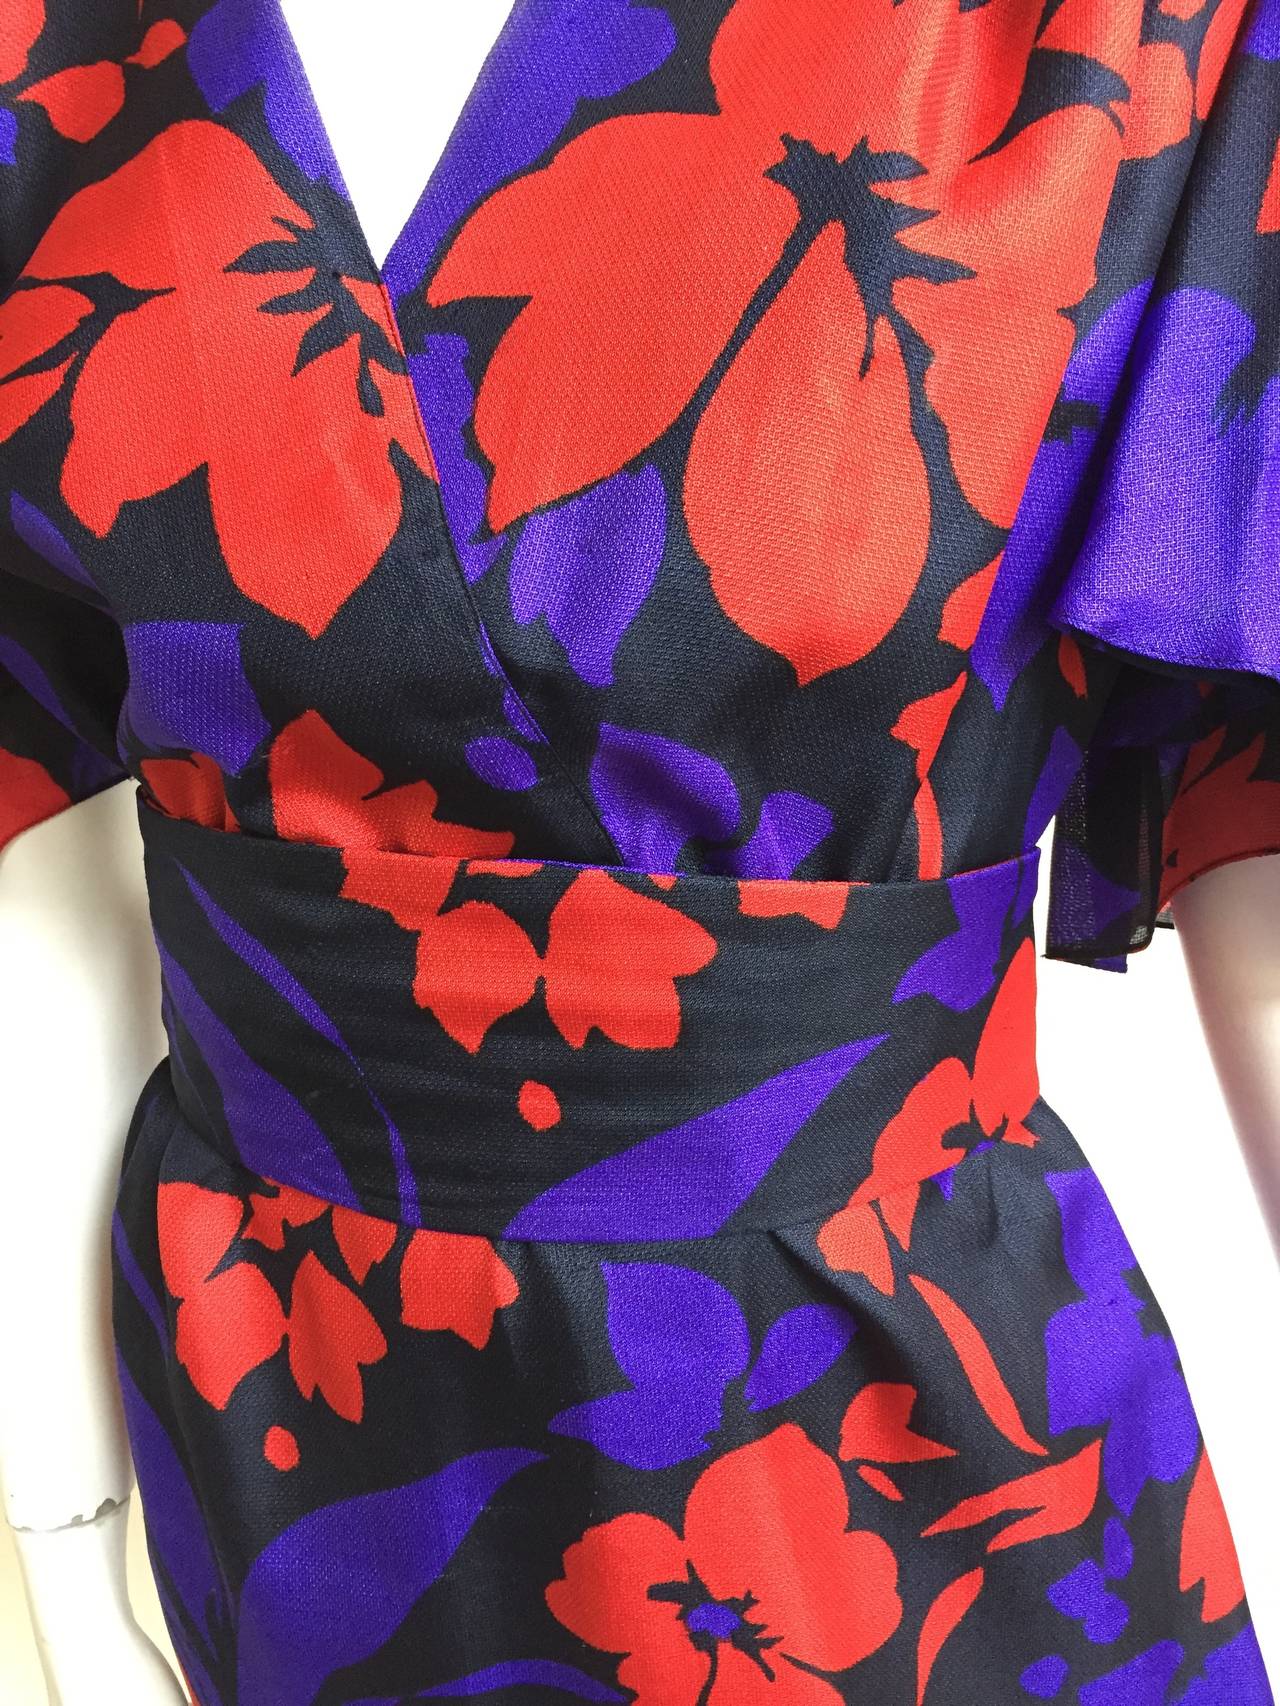 Women's Givenchy 80s flower dress with sash belt size 12.